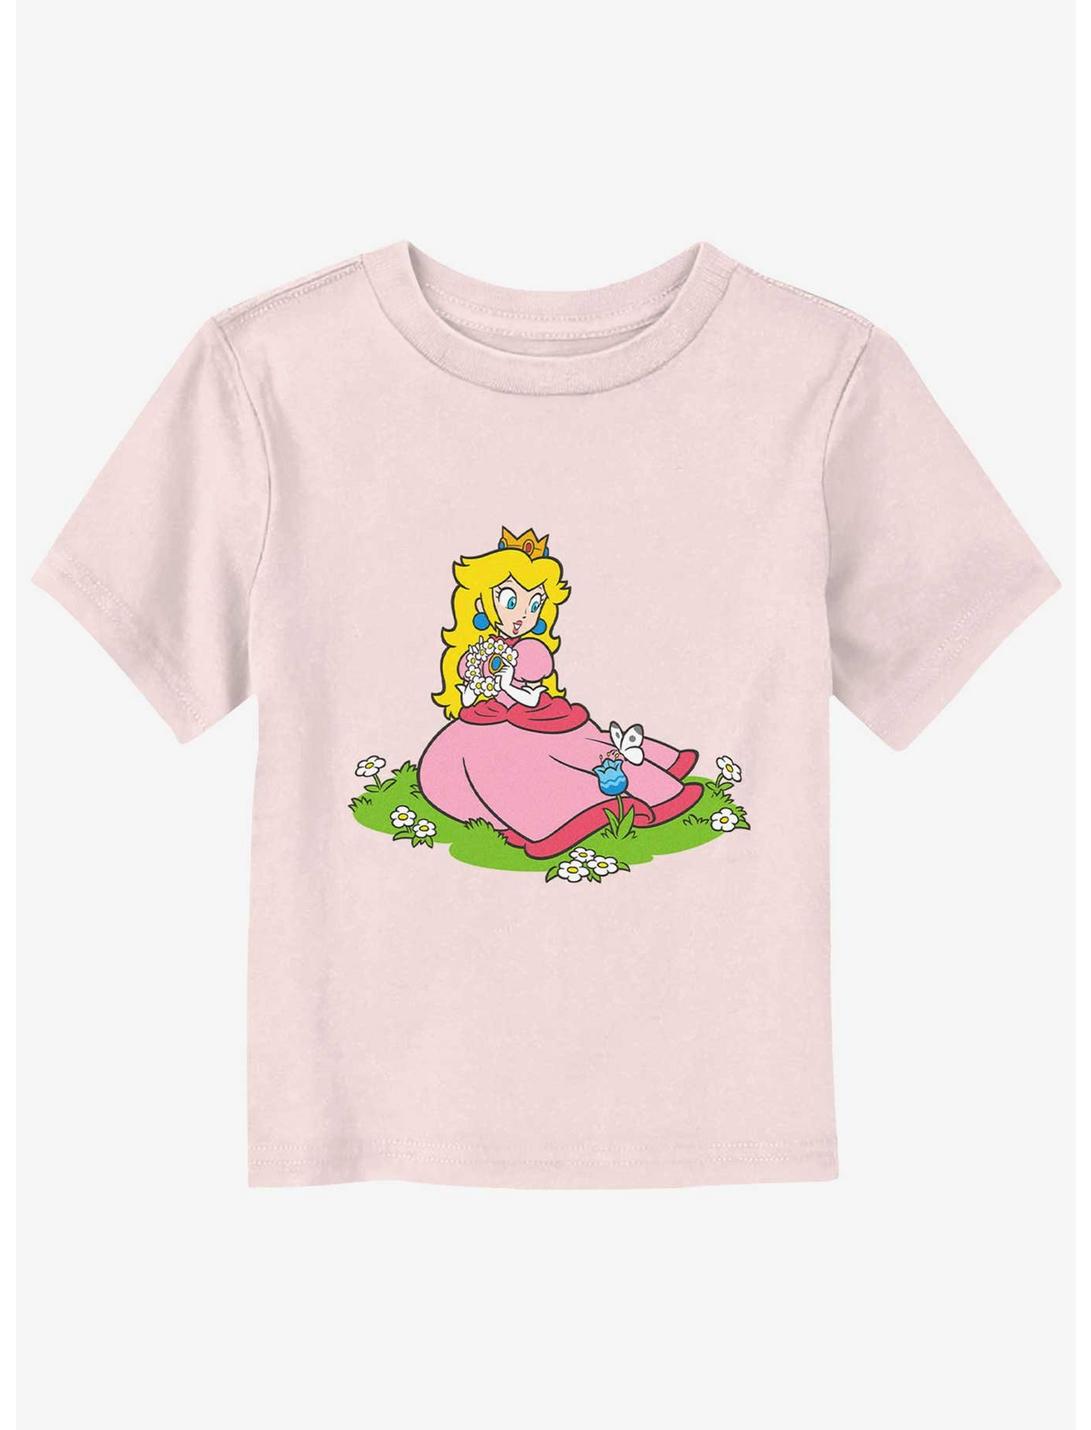 Nintendo Peach And A Butterfly Toddler T-Shirt, LIGHT PINK, hi-res